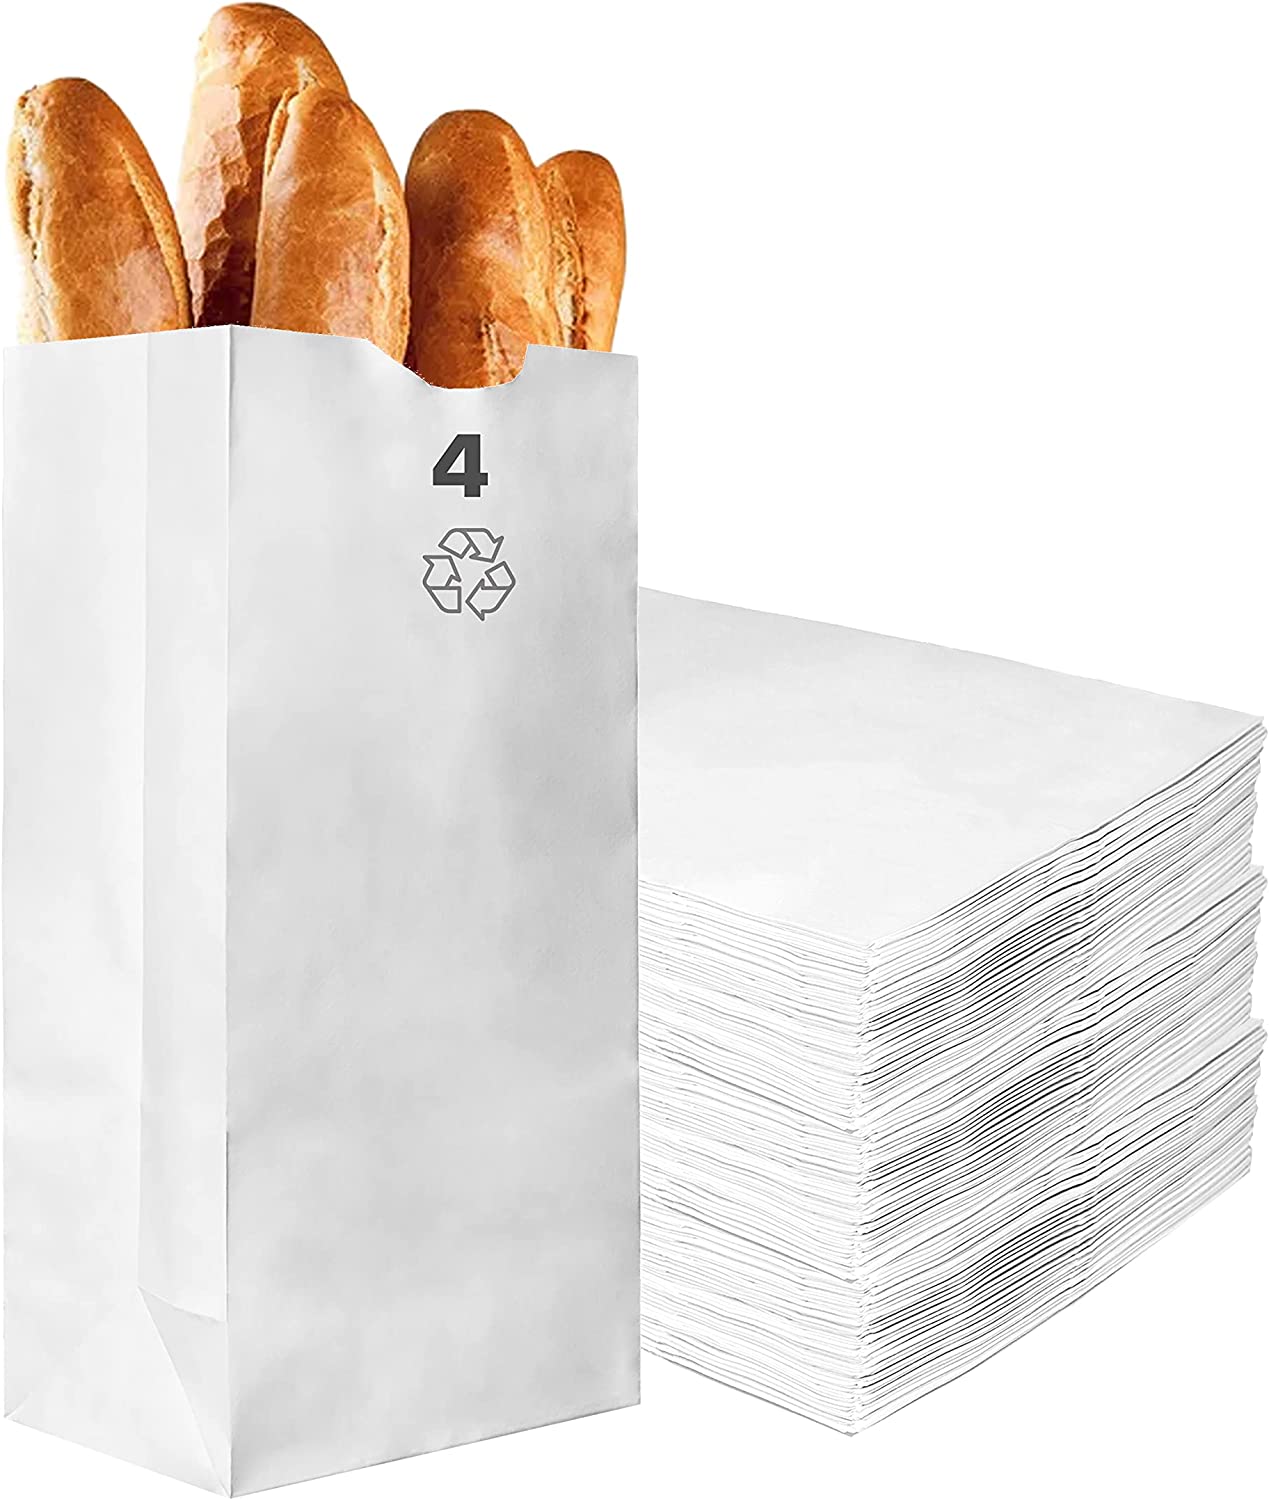 Paper Lunch Bags 4 LB White Paper Bags 4Lb Capacity - Kraft White Paper Bags,  Bakery Bags, Candy Bags, Lunch Bags, Grocery Bags, Craft Bags - #4 Medium Lunch  Paper Bags by